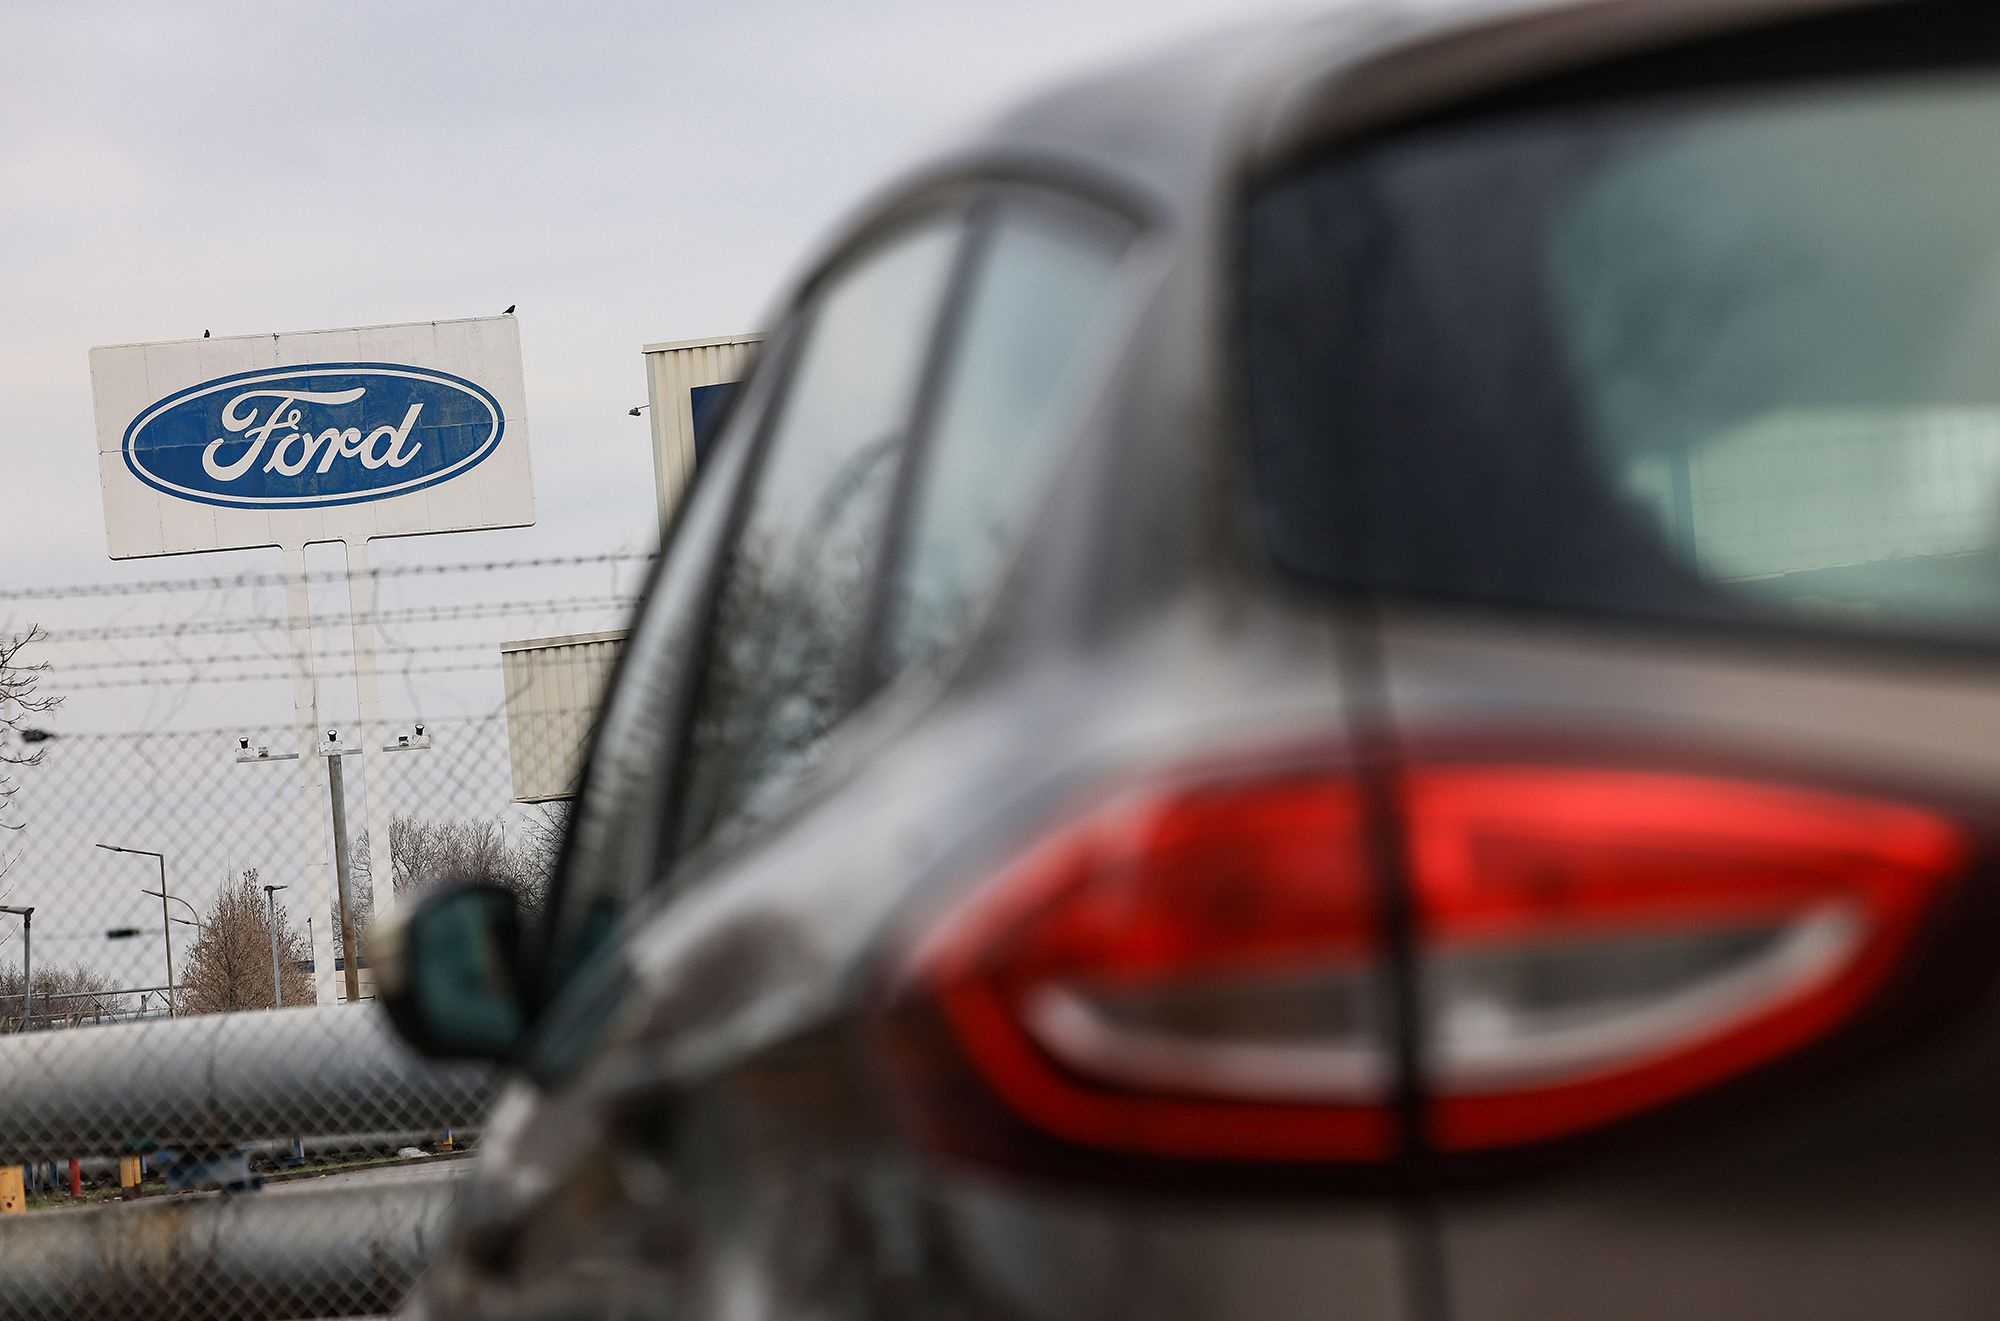 Ford plans to cut 3,200 jobs across Europe and move some product development work to the United States, Germany's IG Metall union said on Monday, vowing action that would disrupt the carmaker across the continent if the cuts go ahead.